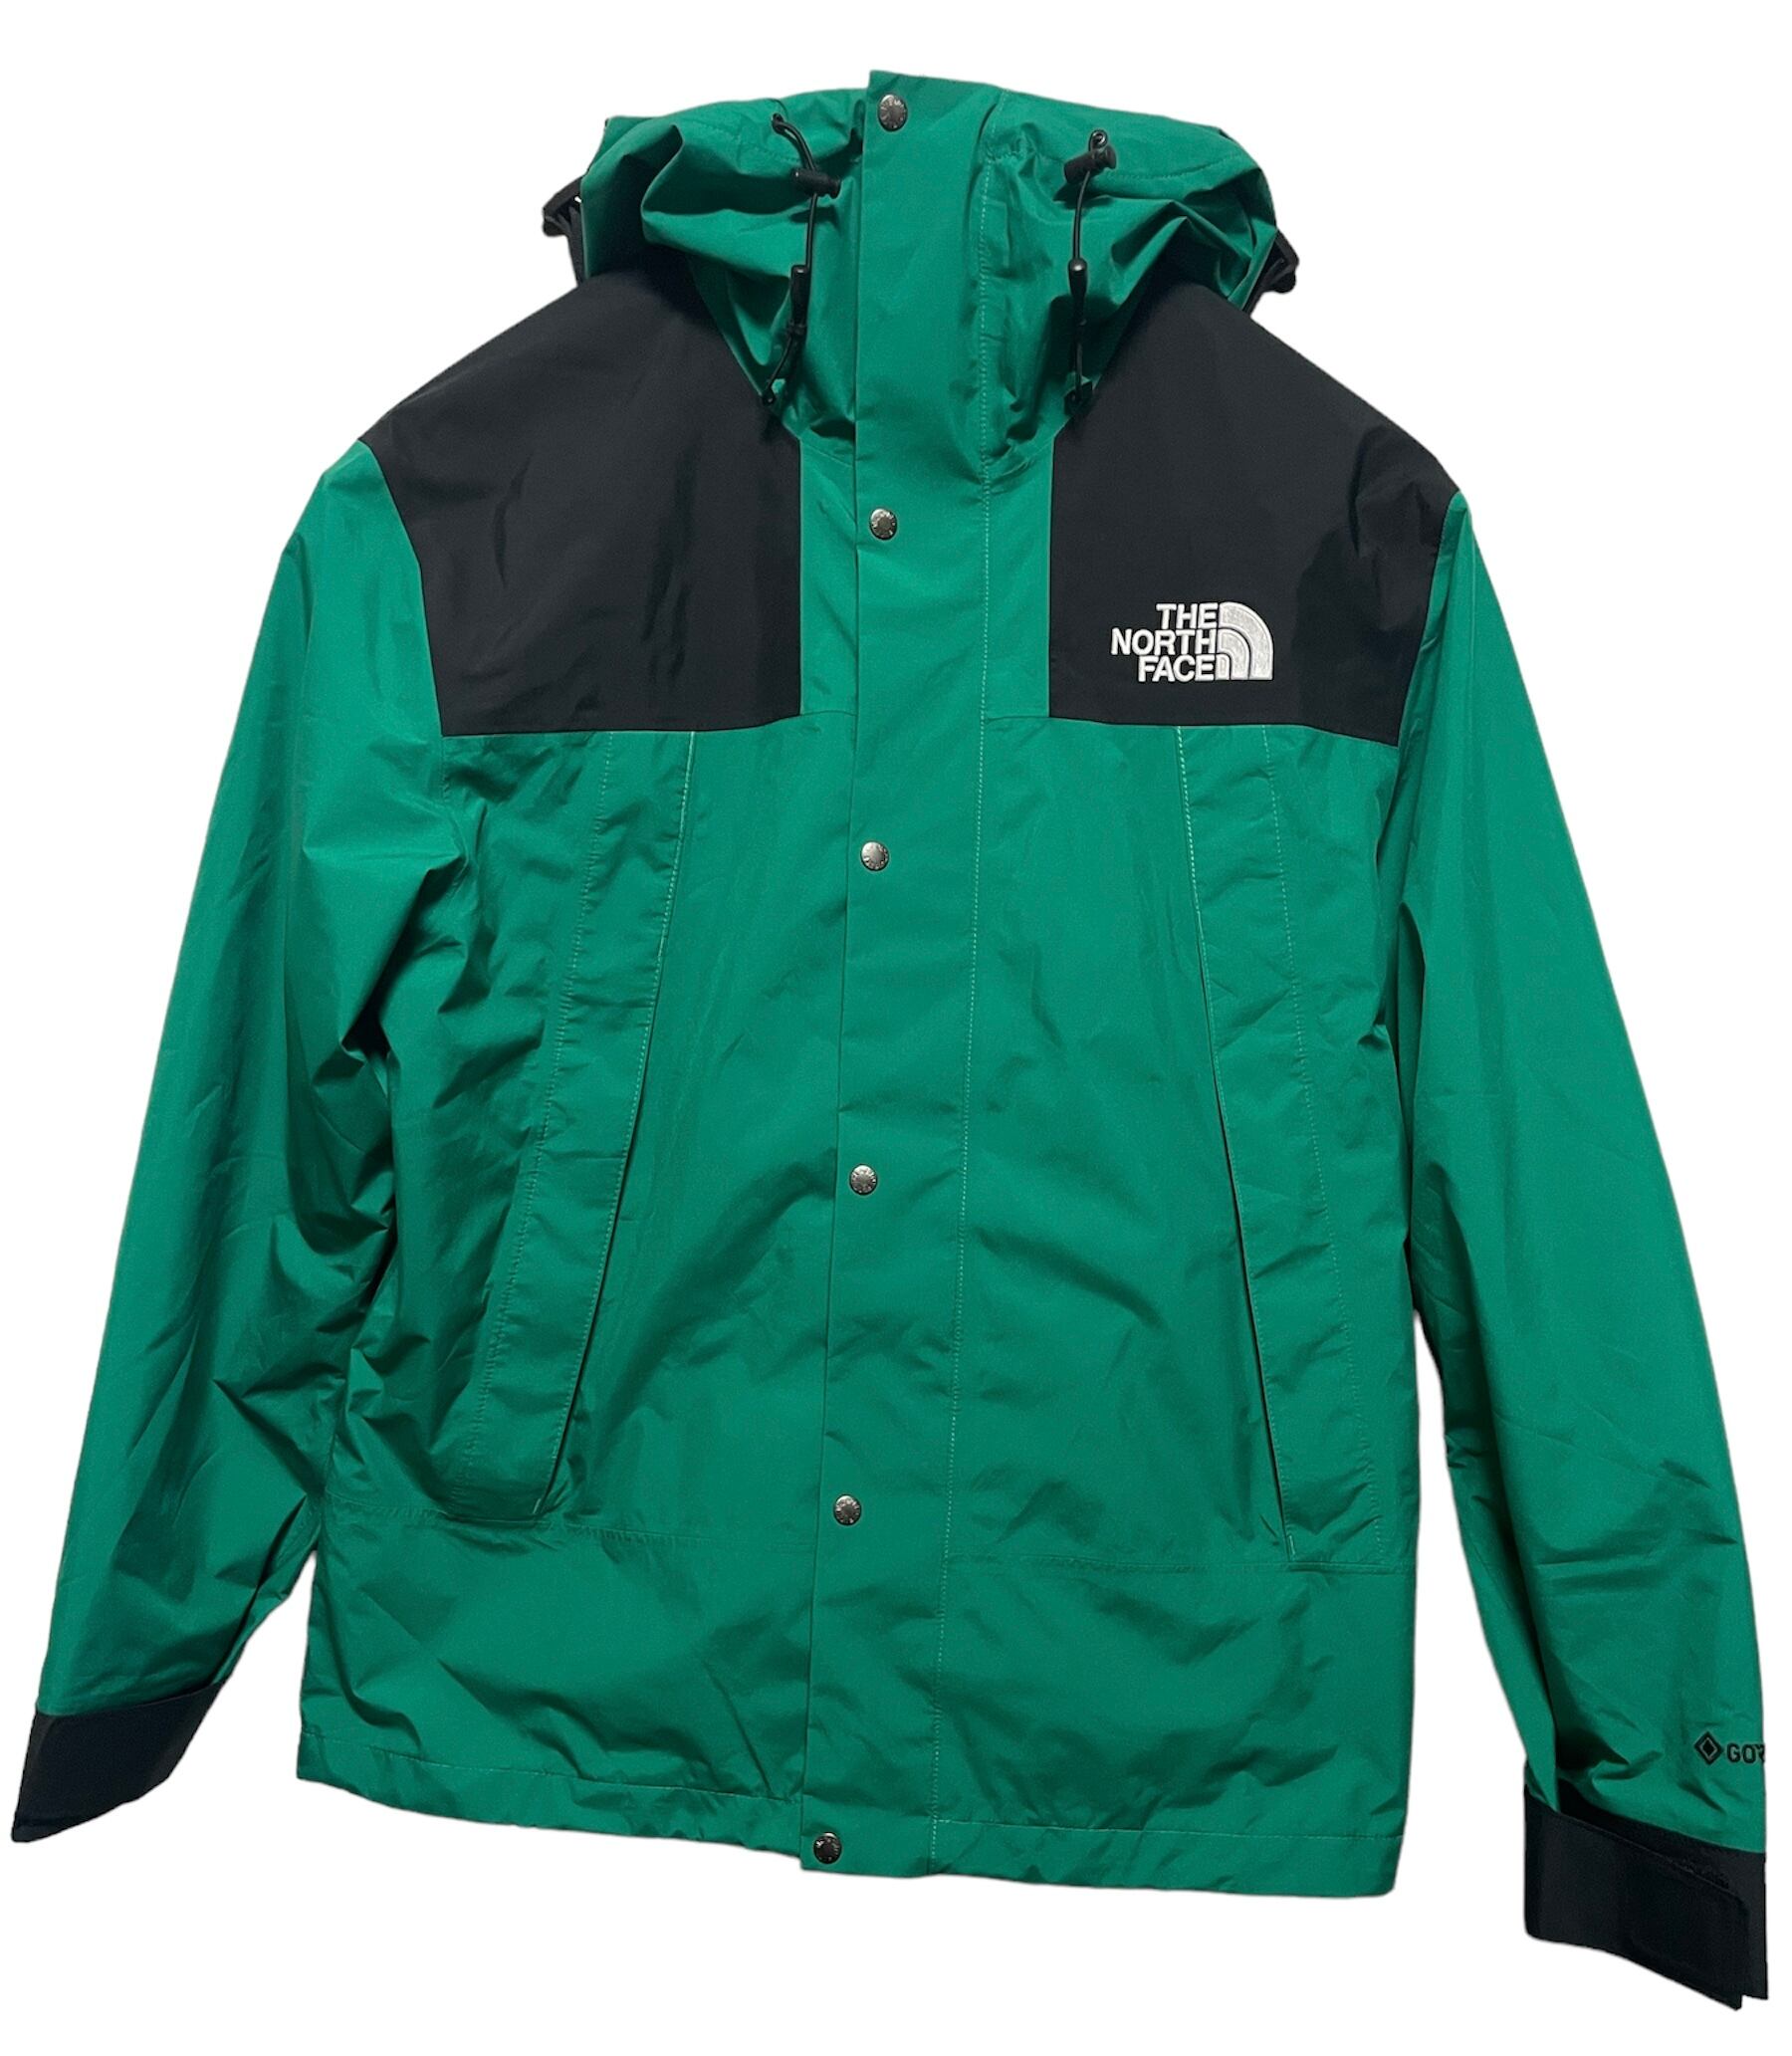 THE NORTH FACE 1990 gore-tex mountain jacket (SIZE: XL) | Penny's 